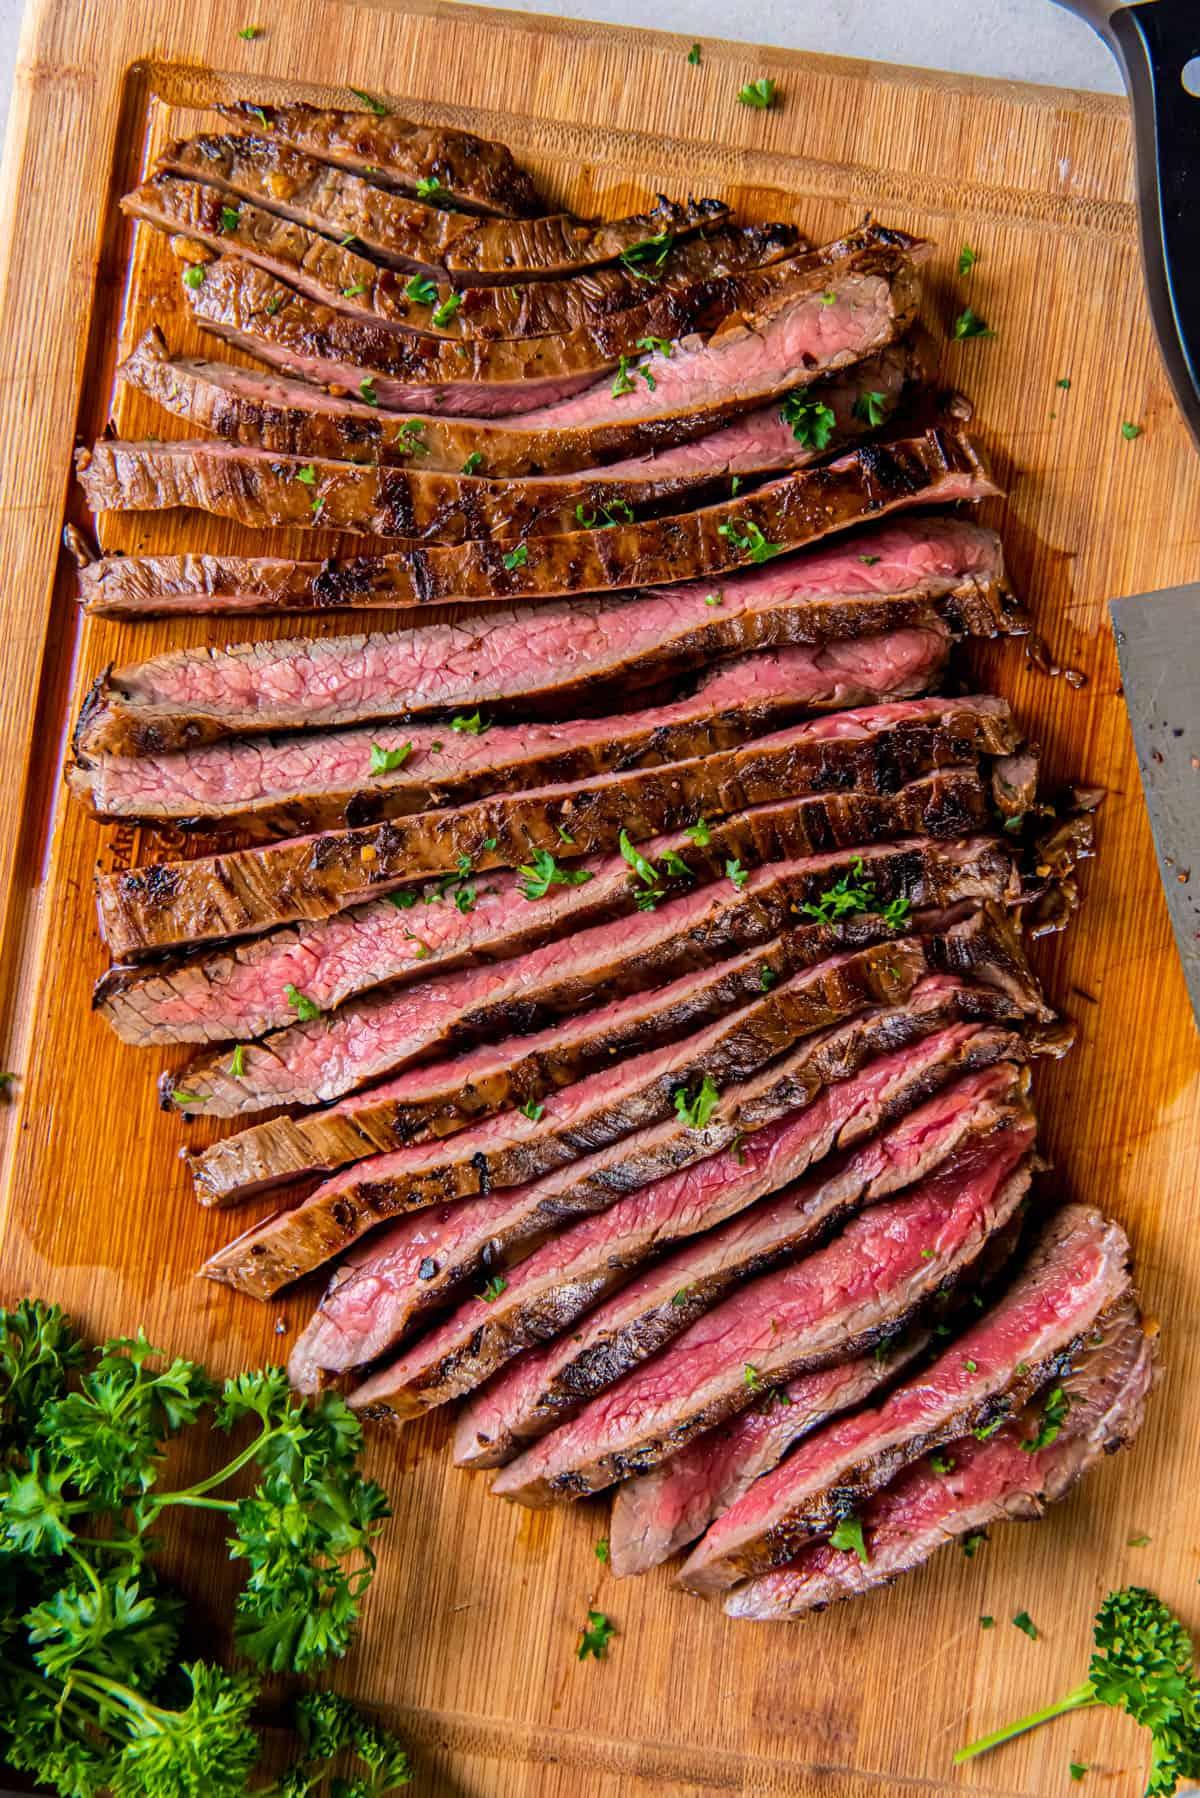 Sliced cast iron flank steak on a cutting board for serving.